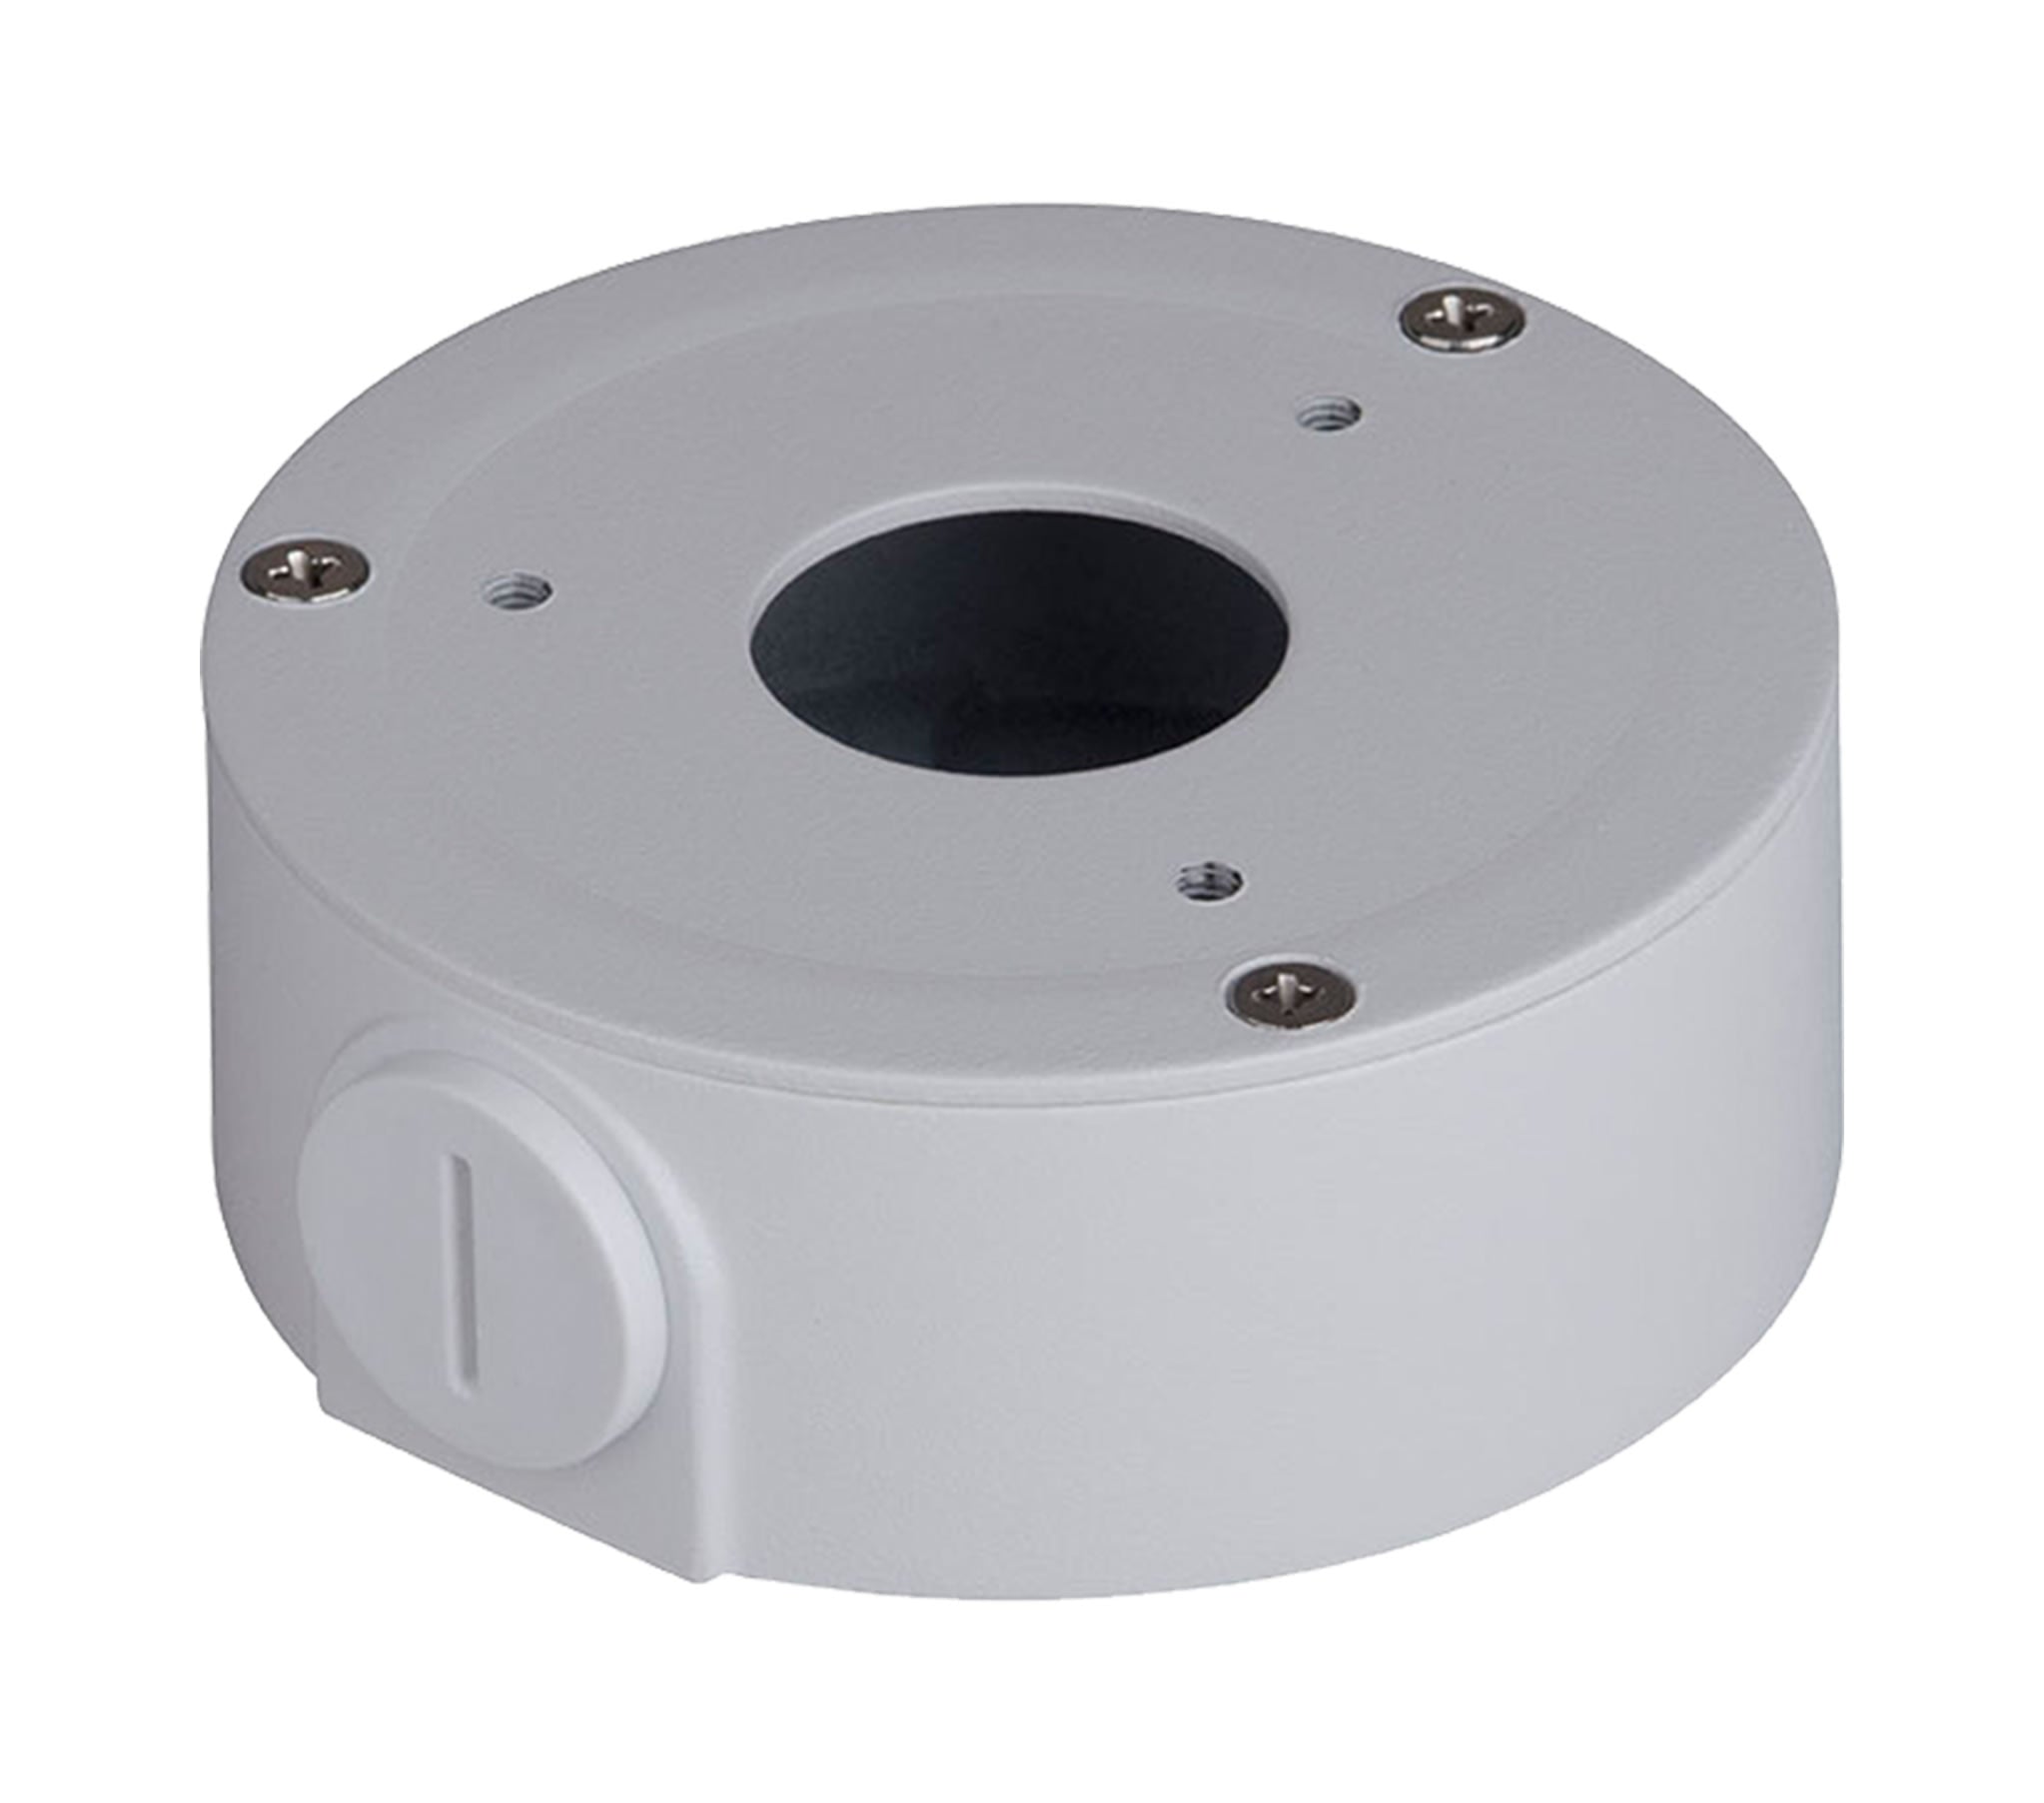 23-4FA134 Water-proof Junction Box for Mini-Bullet Camera